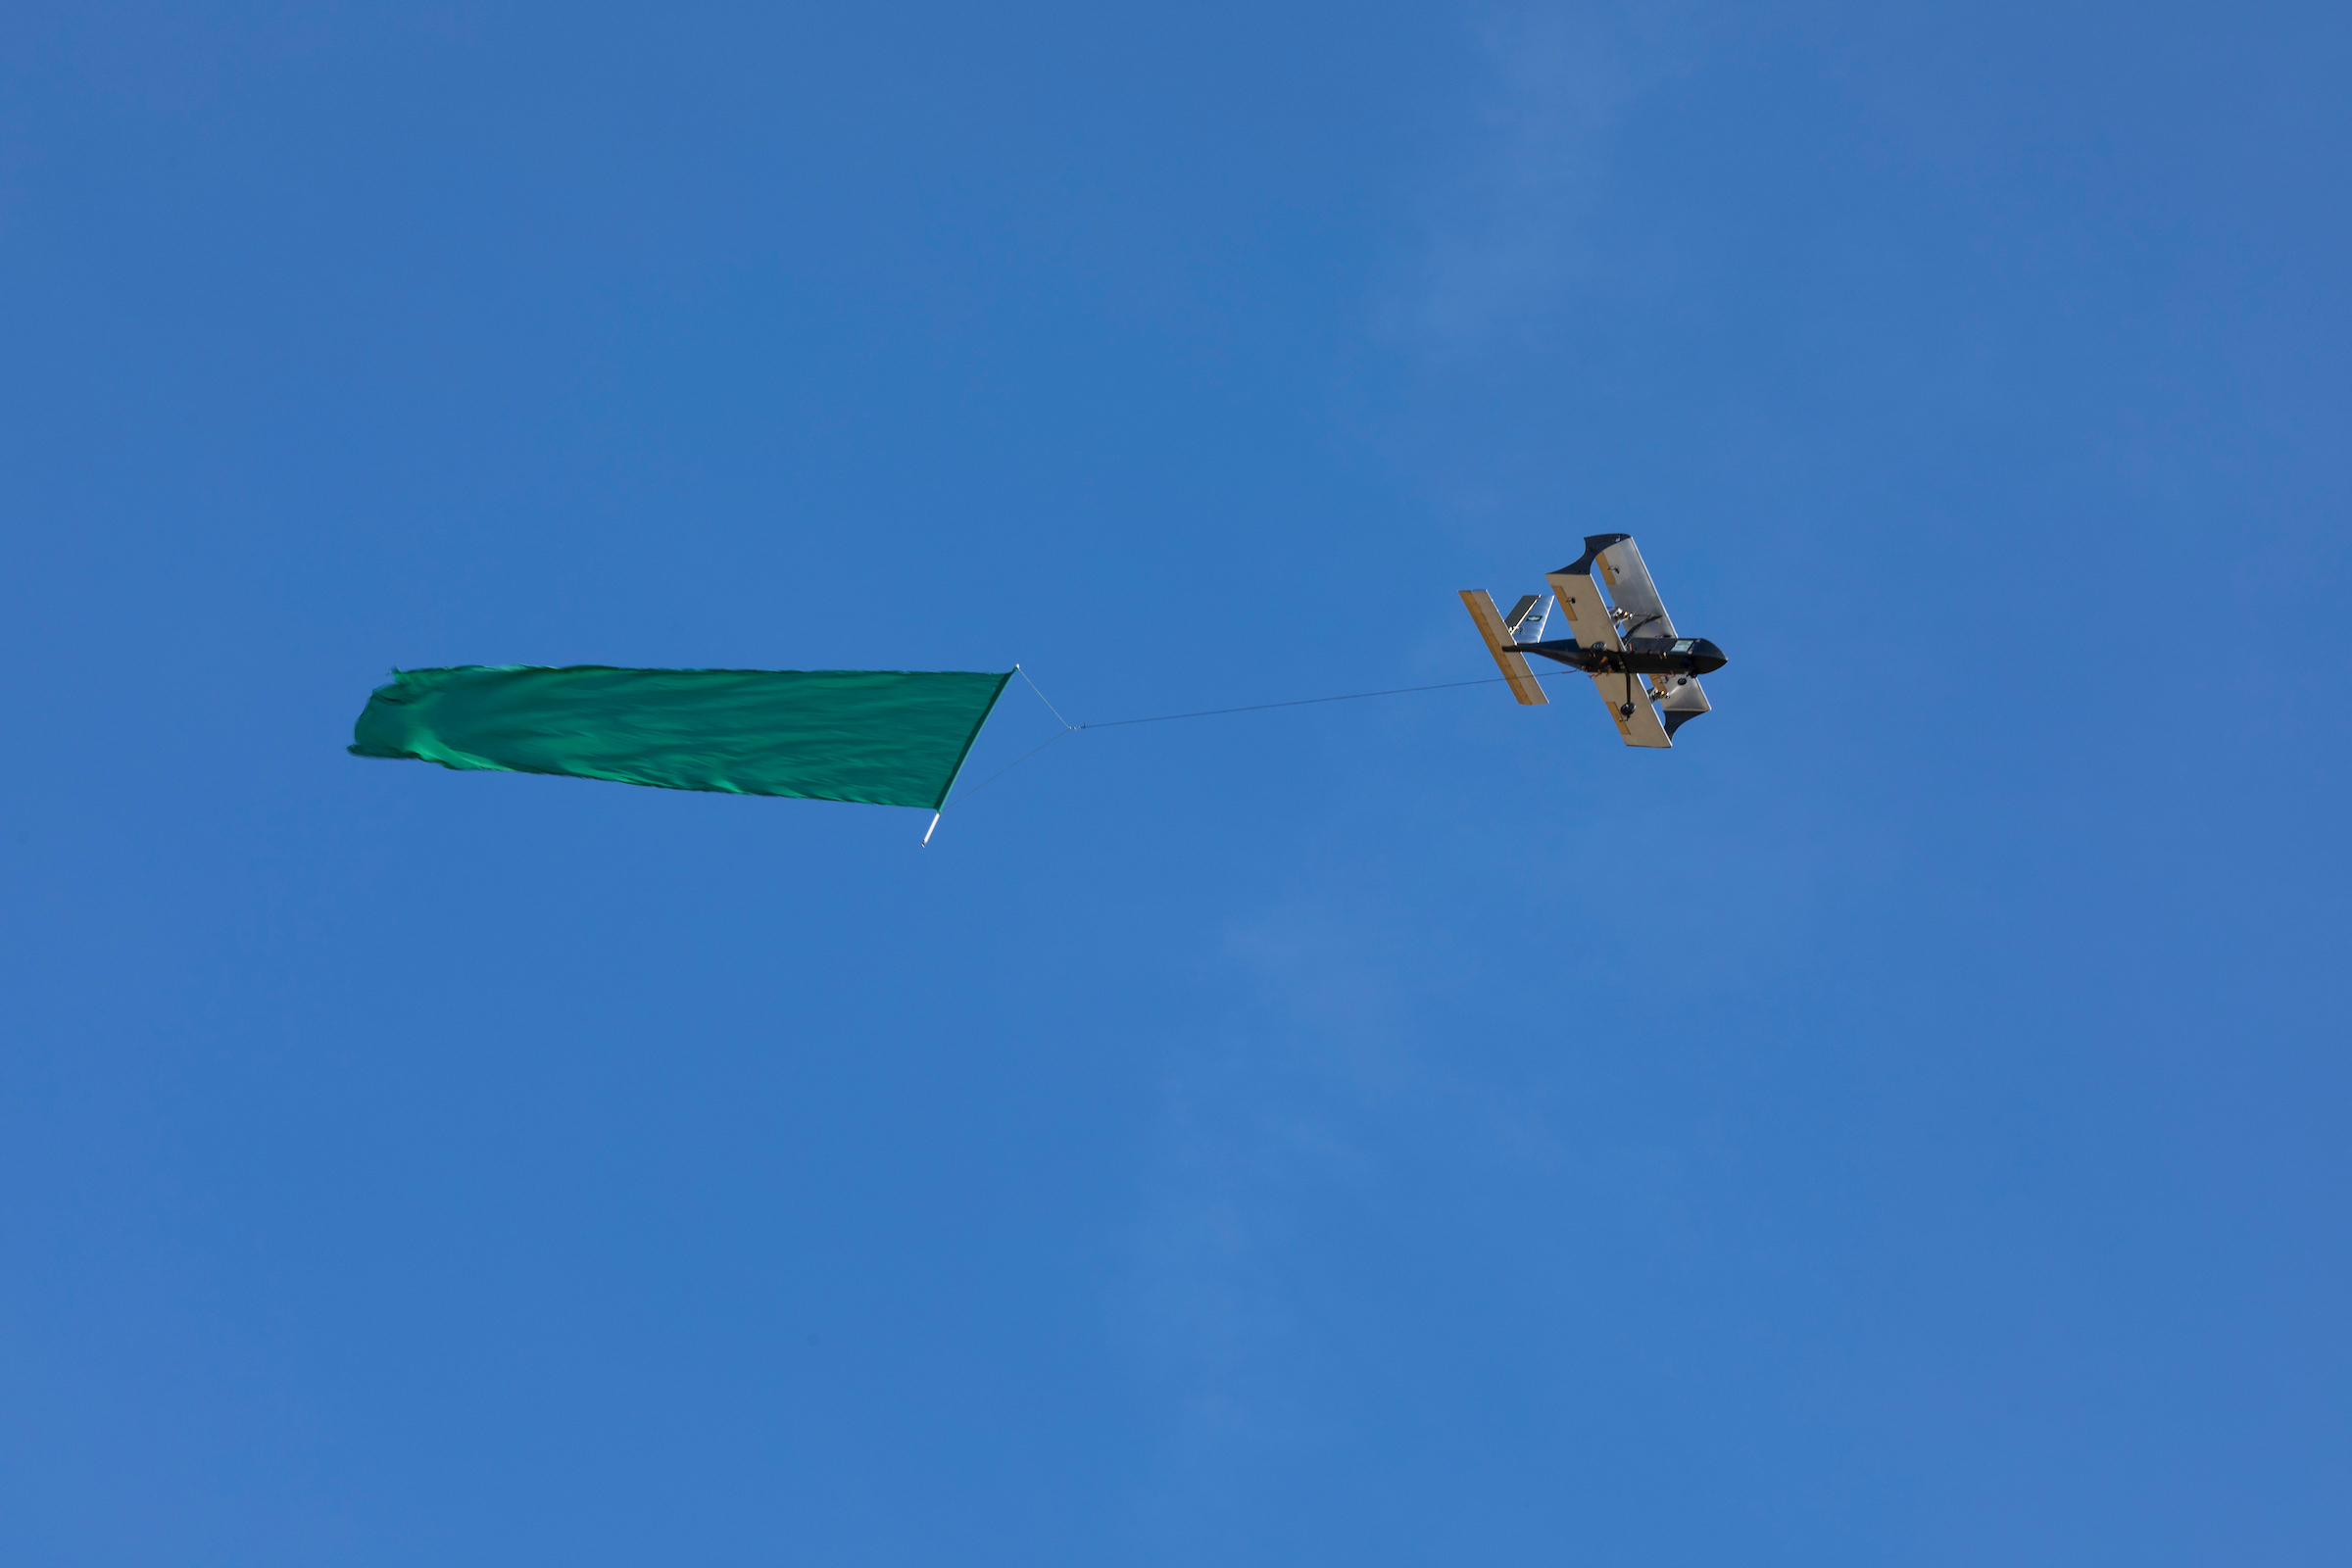 Photo Tom Wagner/Missouri S&amp;T, Miner Aviation design team flight test at Rolla National Airport RC strip, in Vichy, MO. Flight testing two different length banners, both successful deployments. ©Missouri S&amp;T 2019, All moral rights Asserted. RIGHTS Protected, this image is copyrighted and no usage is allowed without written permission from Missouri S&amp;T Marketing Communications Dept.